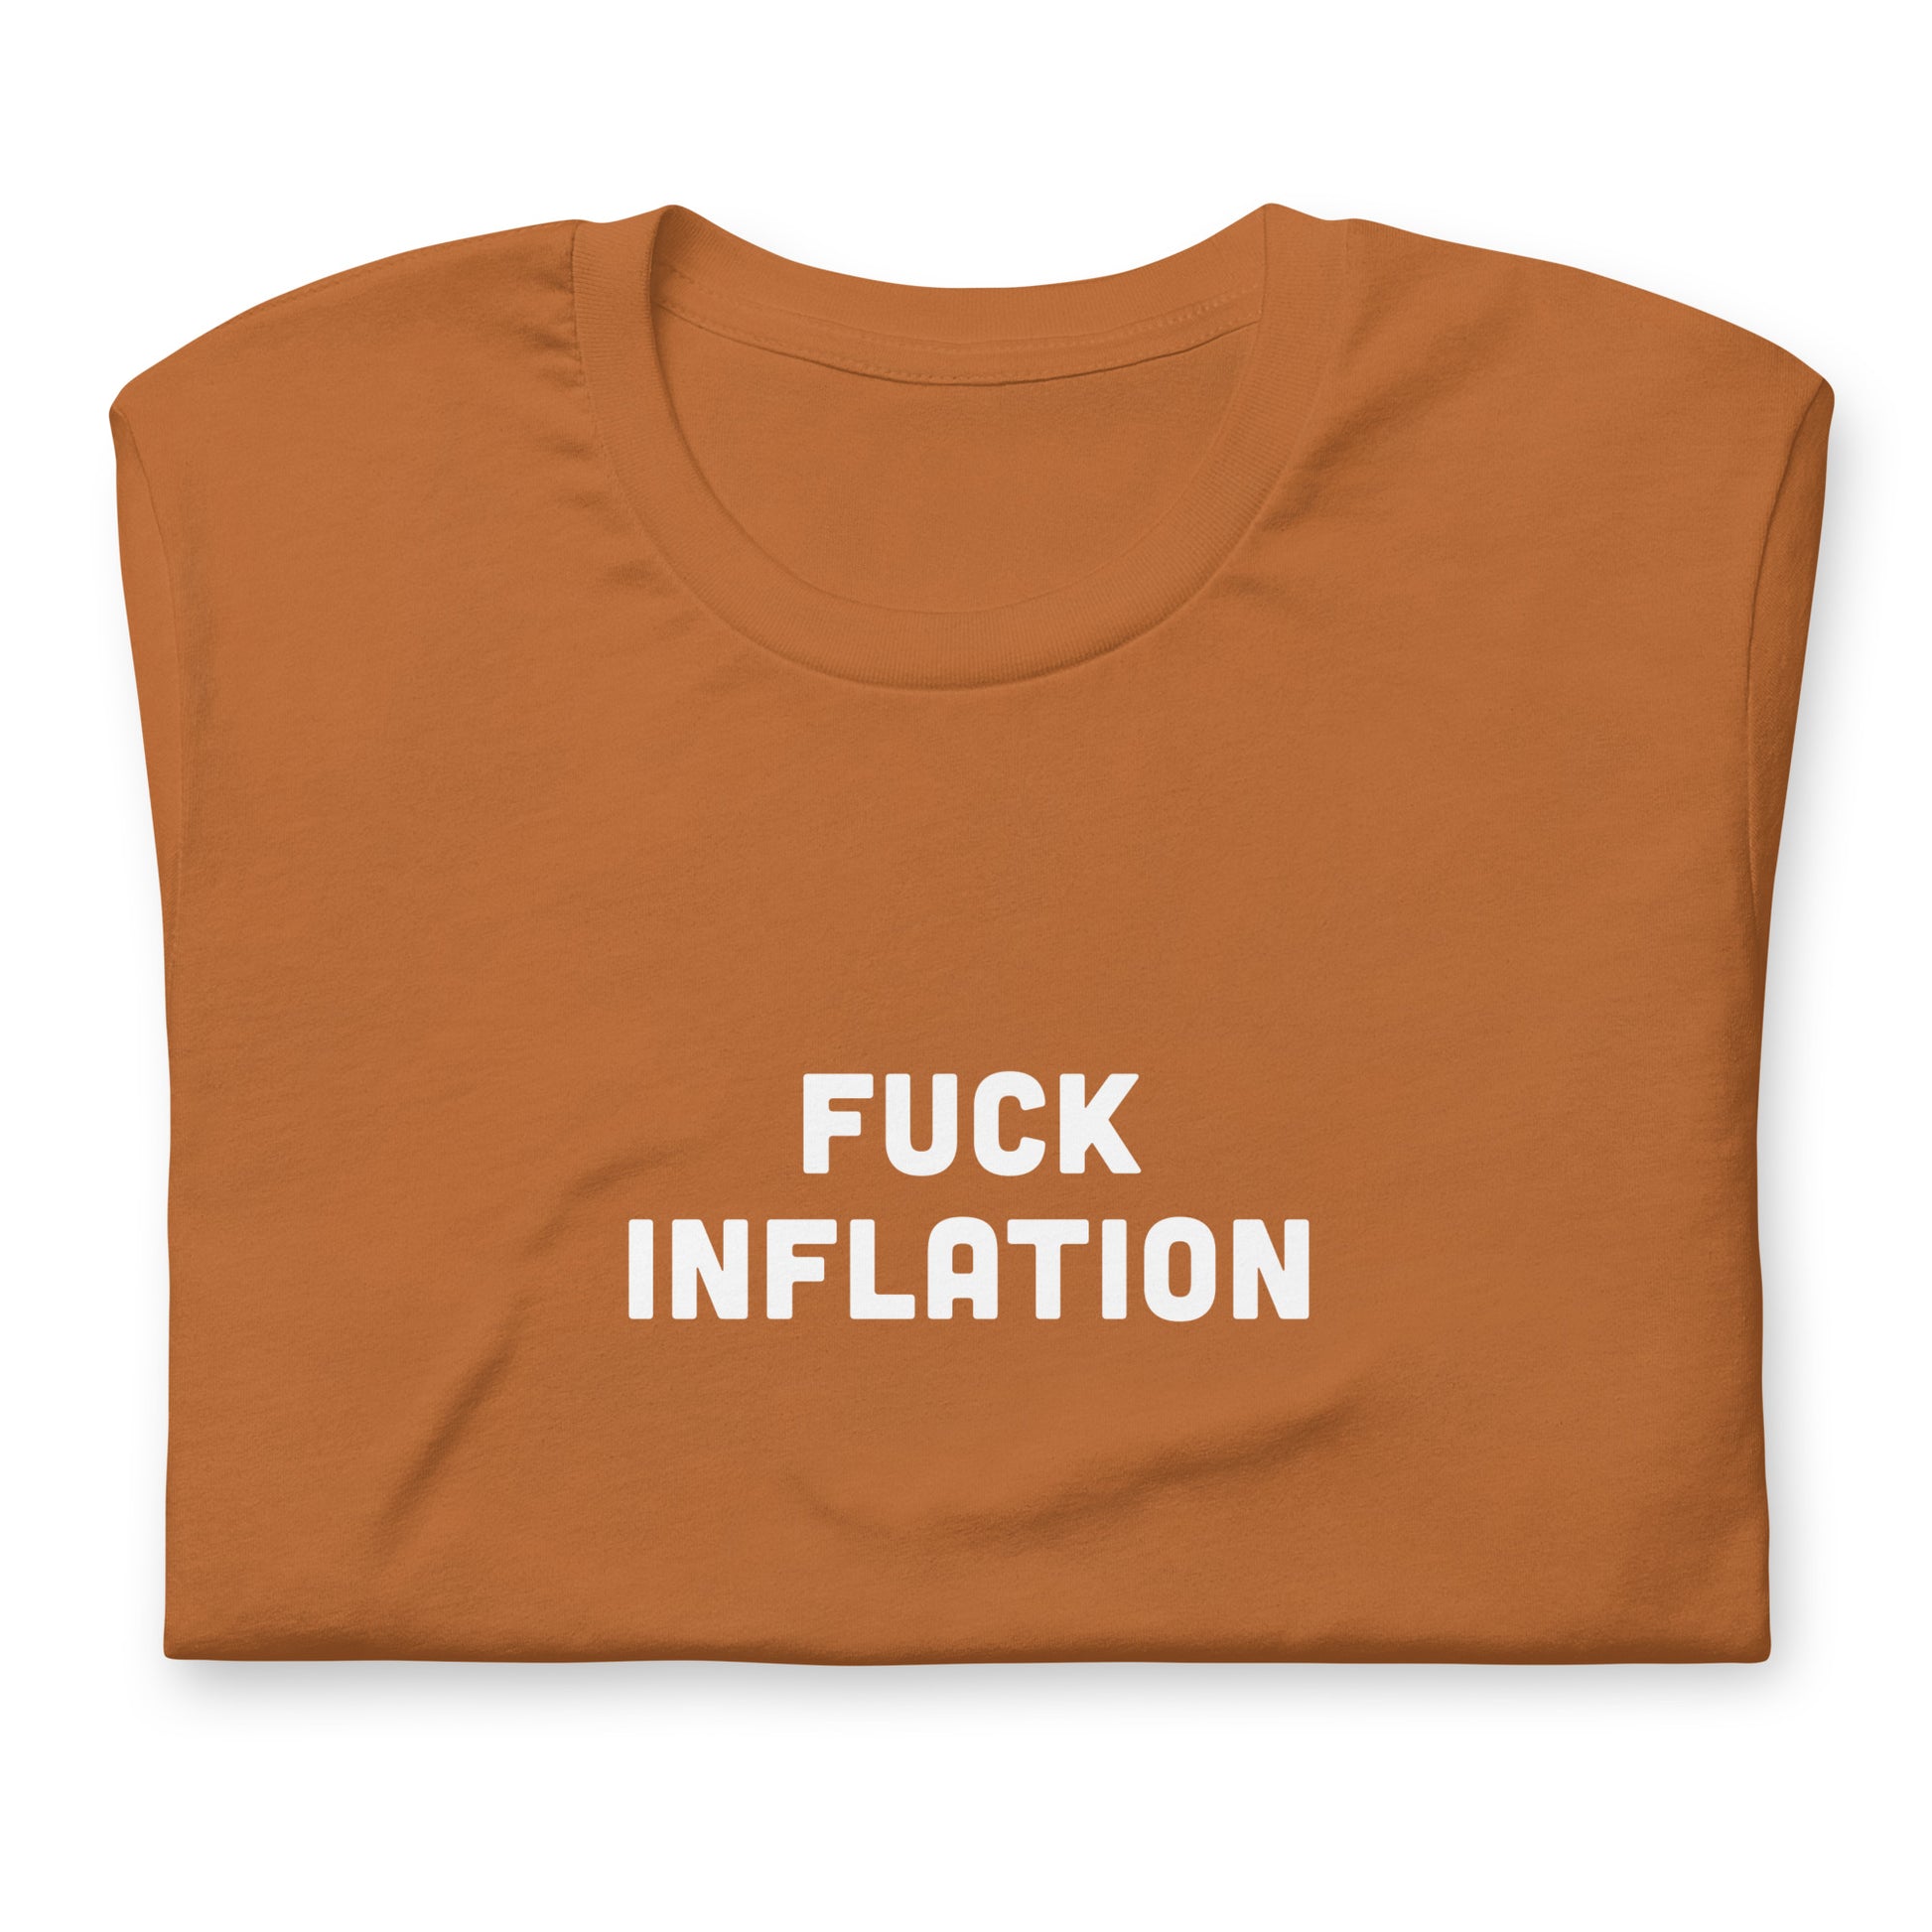 Fuck Inflation T-Shirt 1 Size XL Color Navy